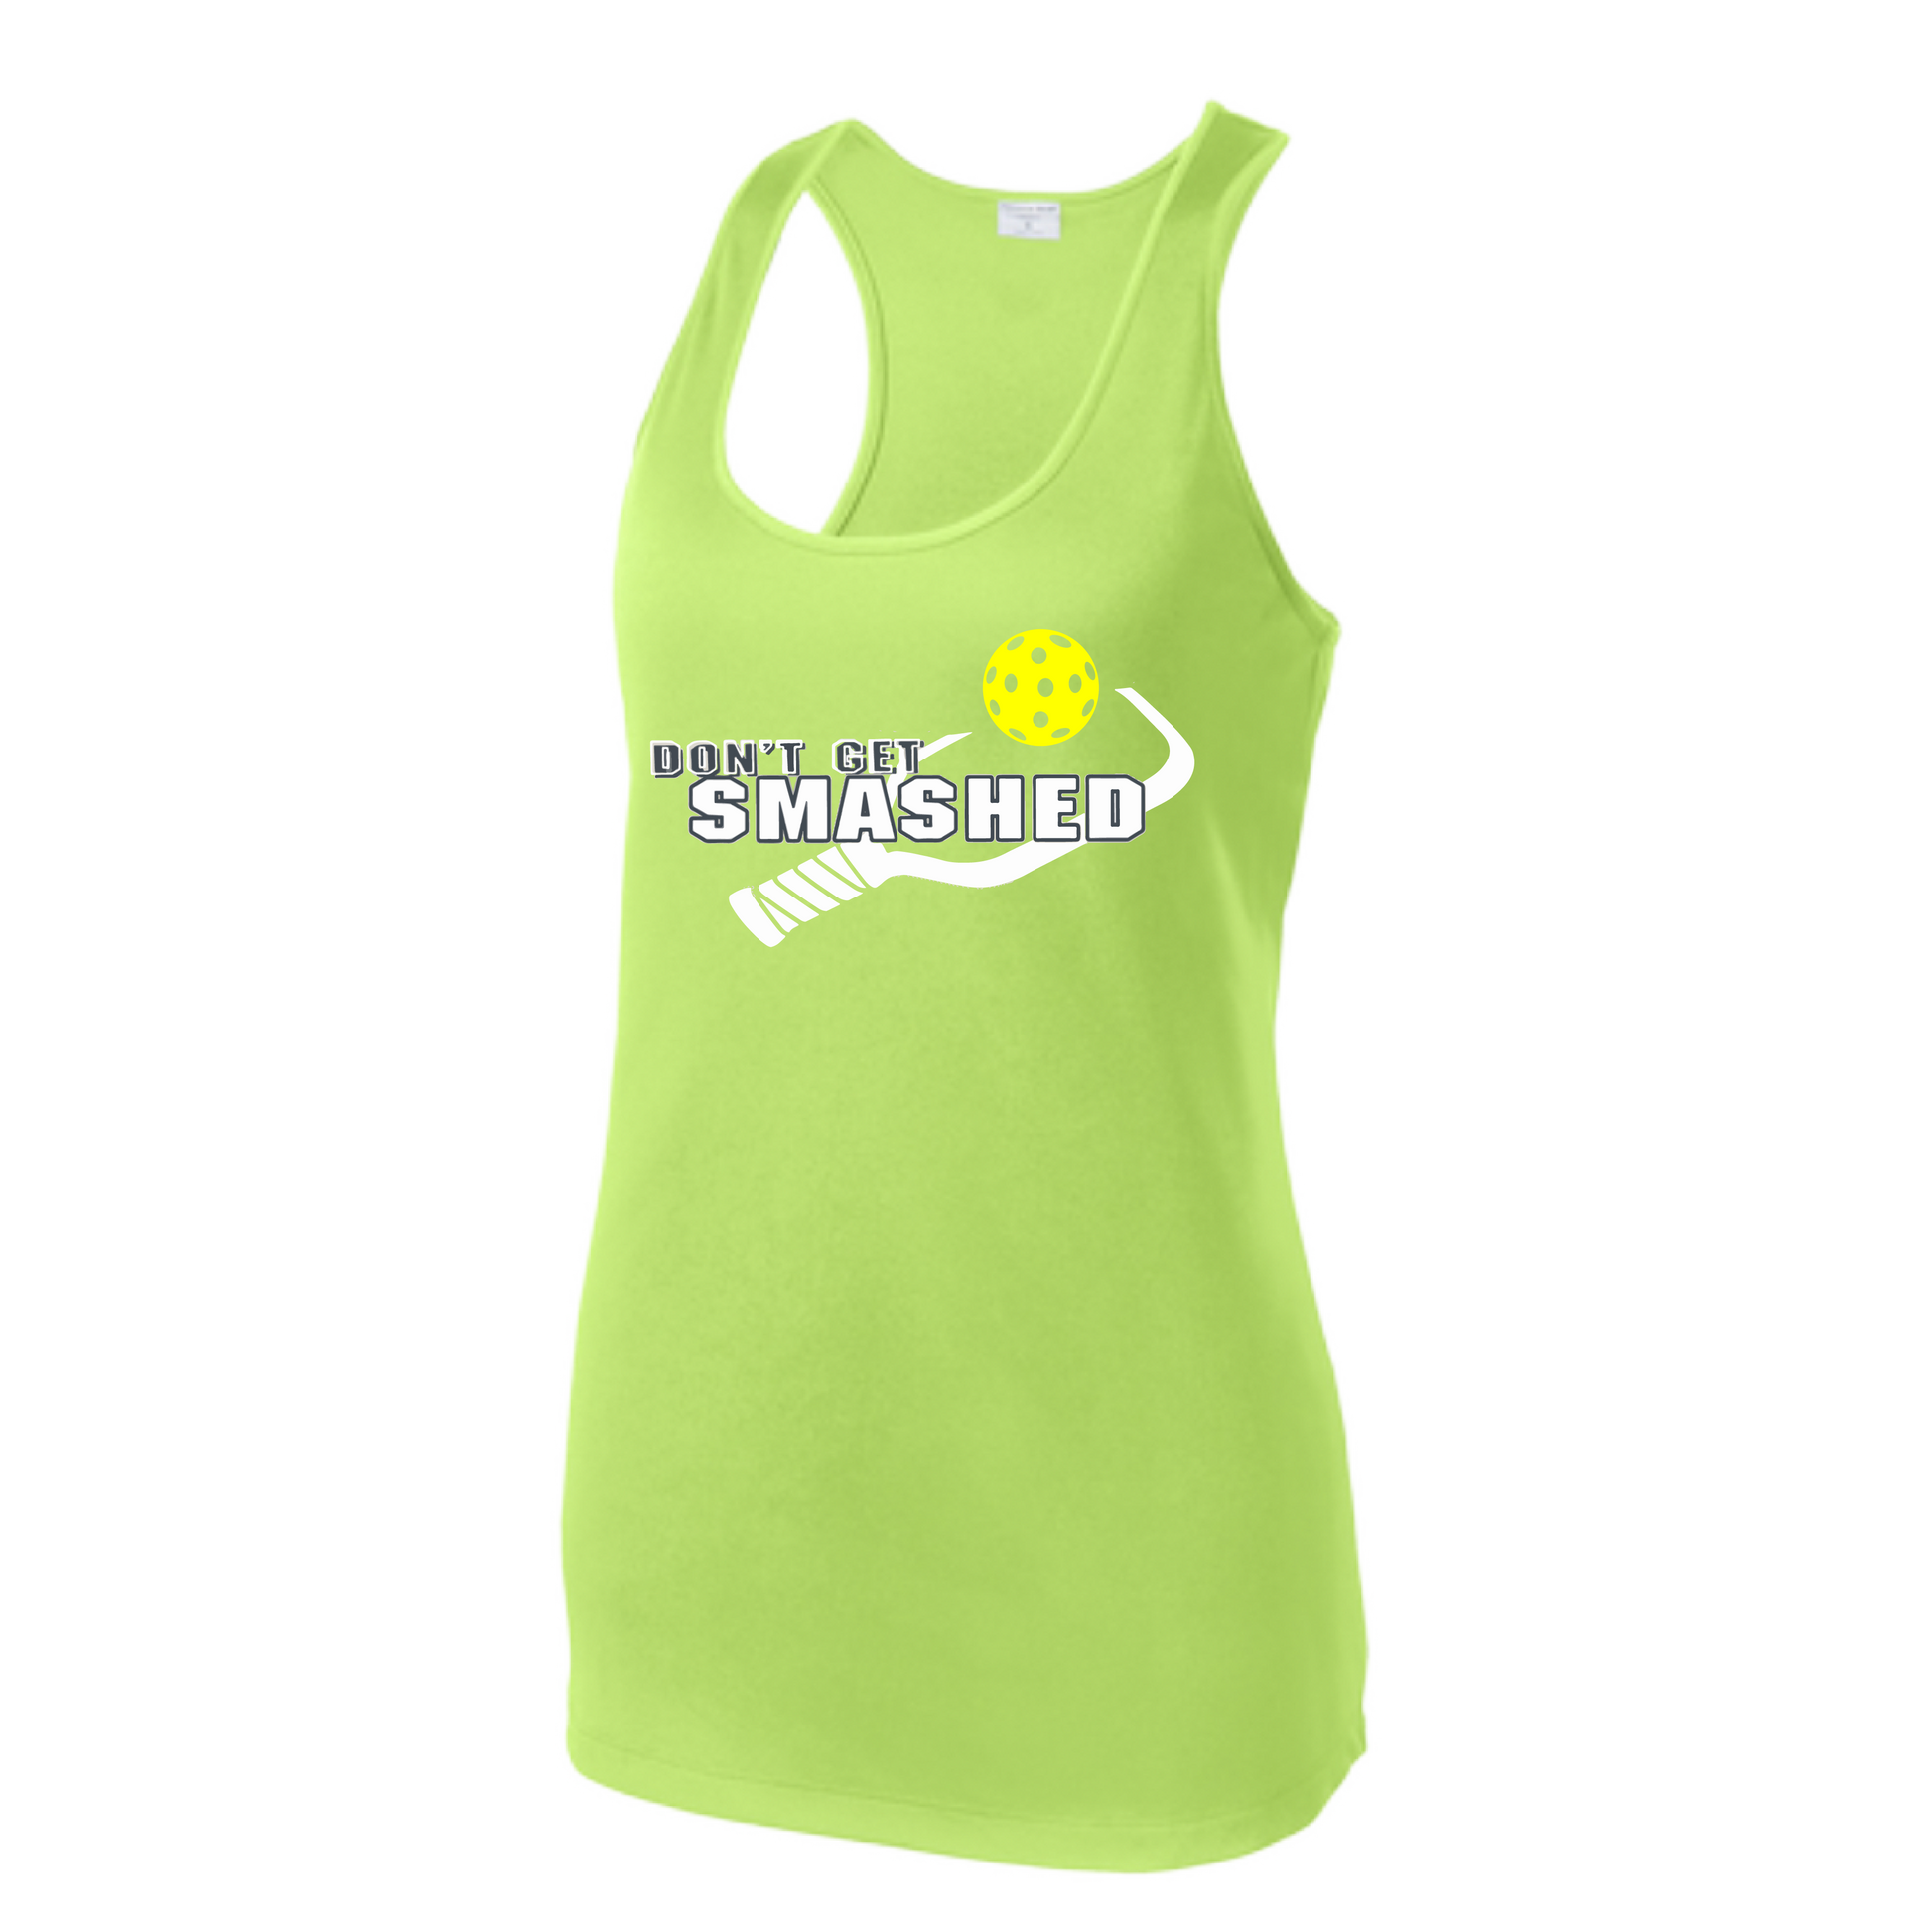 Find your perfect fit in this Women's pickleball shirt, which blends softness and attitude perfectly. You'll love the ultra-comfortable material and moisture-wicking properties, as well as its tri-blend softness. Plus, PosiCharge technology keeps the color vibrant. Breathable and lightweight too - you won't want to take it off!